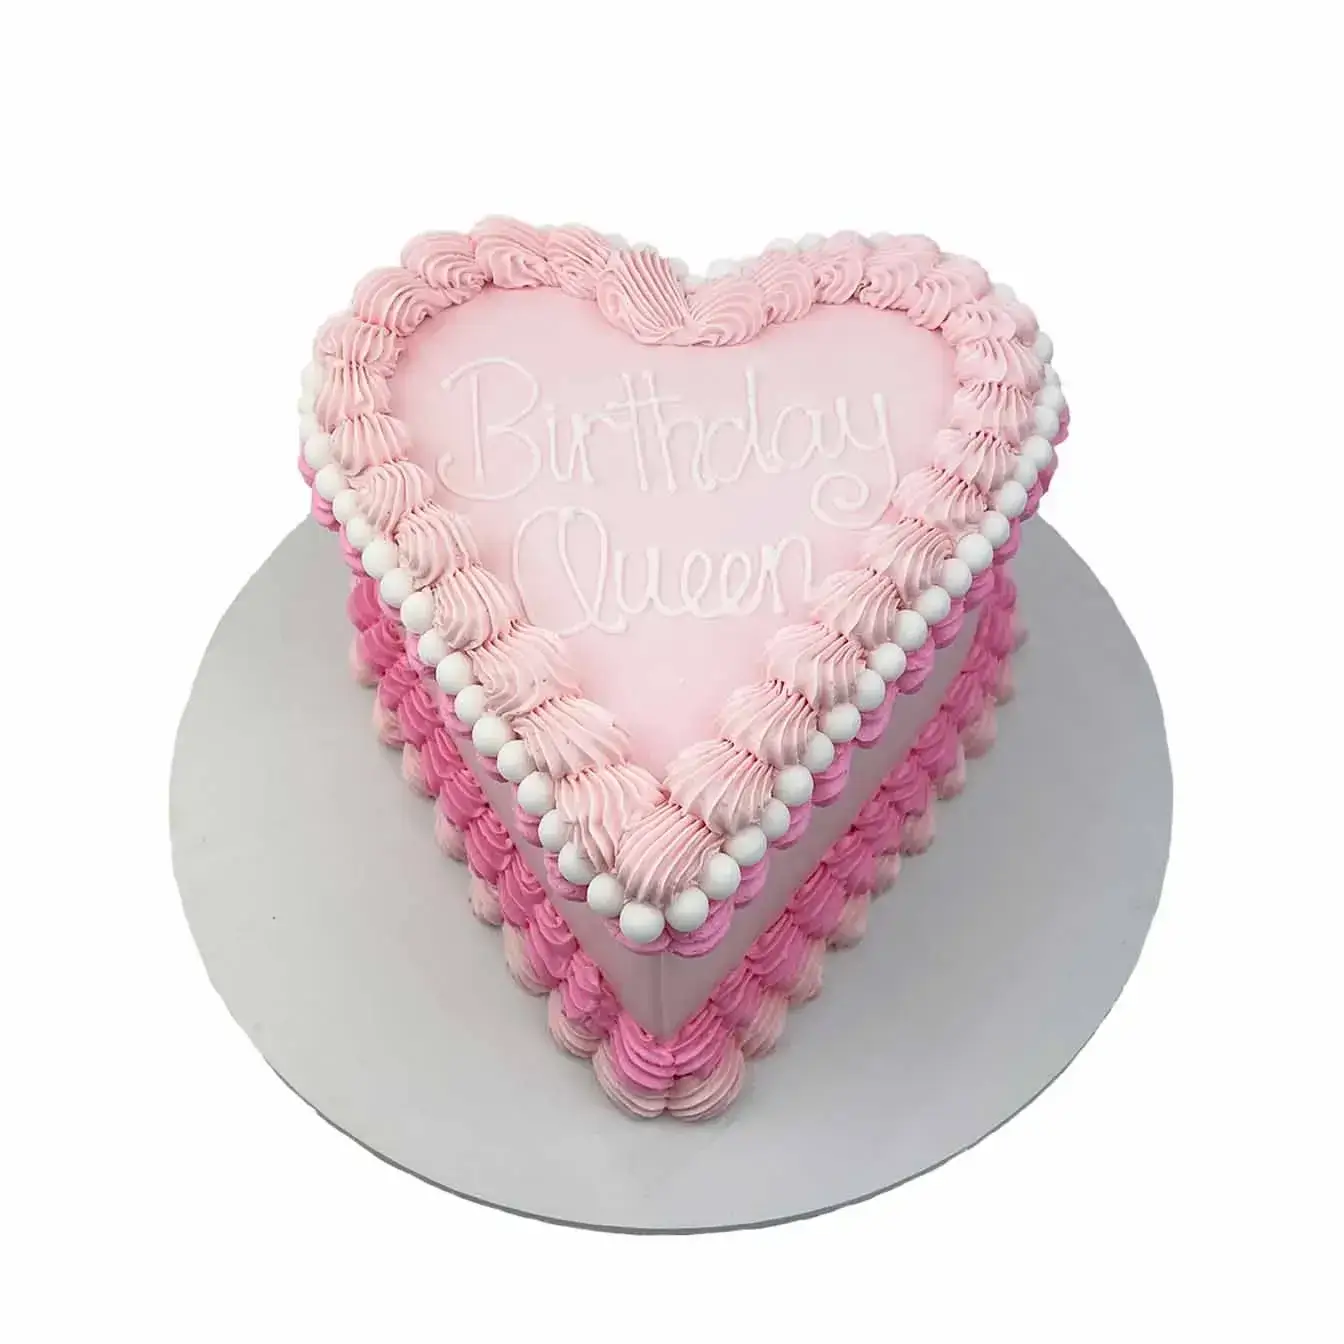 Rustic Pink Heart Piped Cake - A cake with delicate heart piping in rustic pink, a graceful centerpiece for celebrations filled with love and simplicity.